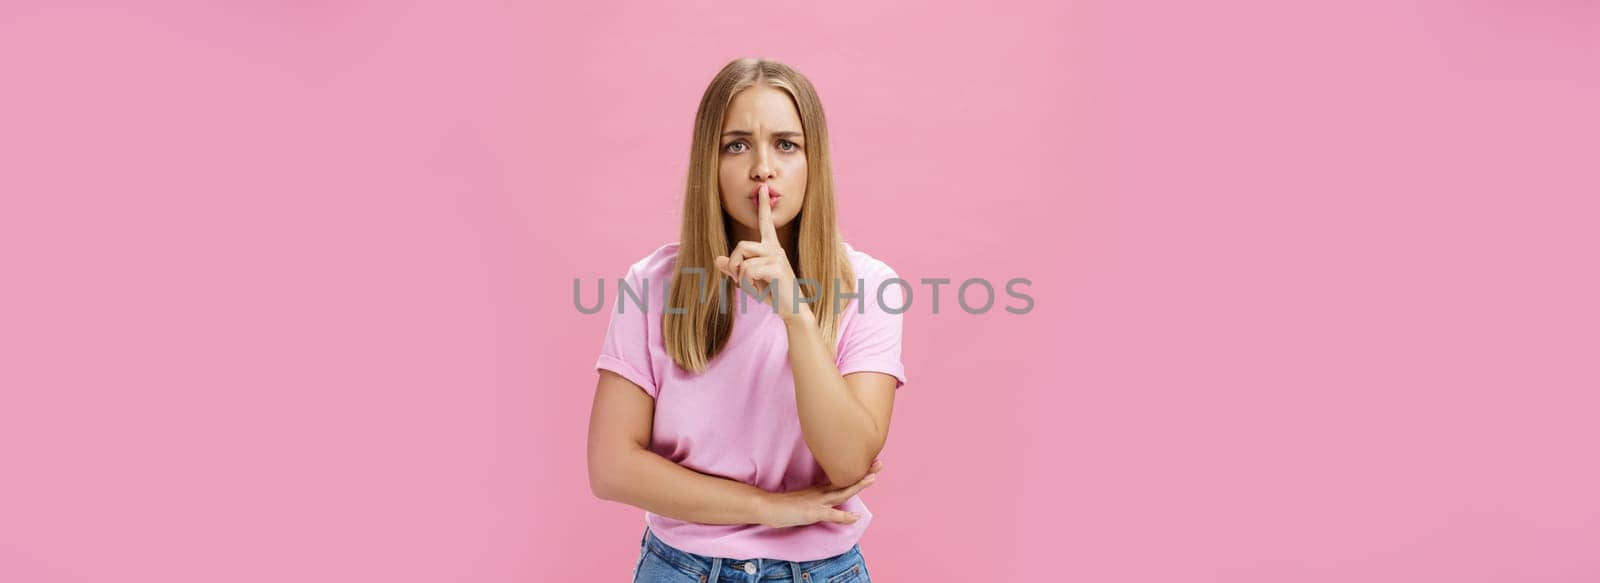 Shh keep voice down. Serious-looking concerned determined female nanny looking after kid asking not speak showing shush gesture with index finger over mouth, having secret concerned someone know it.